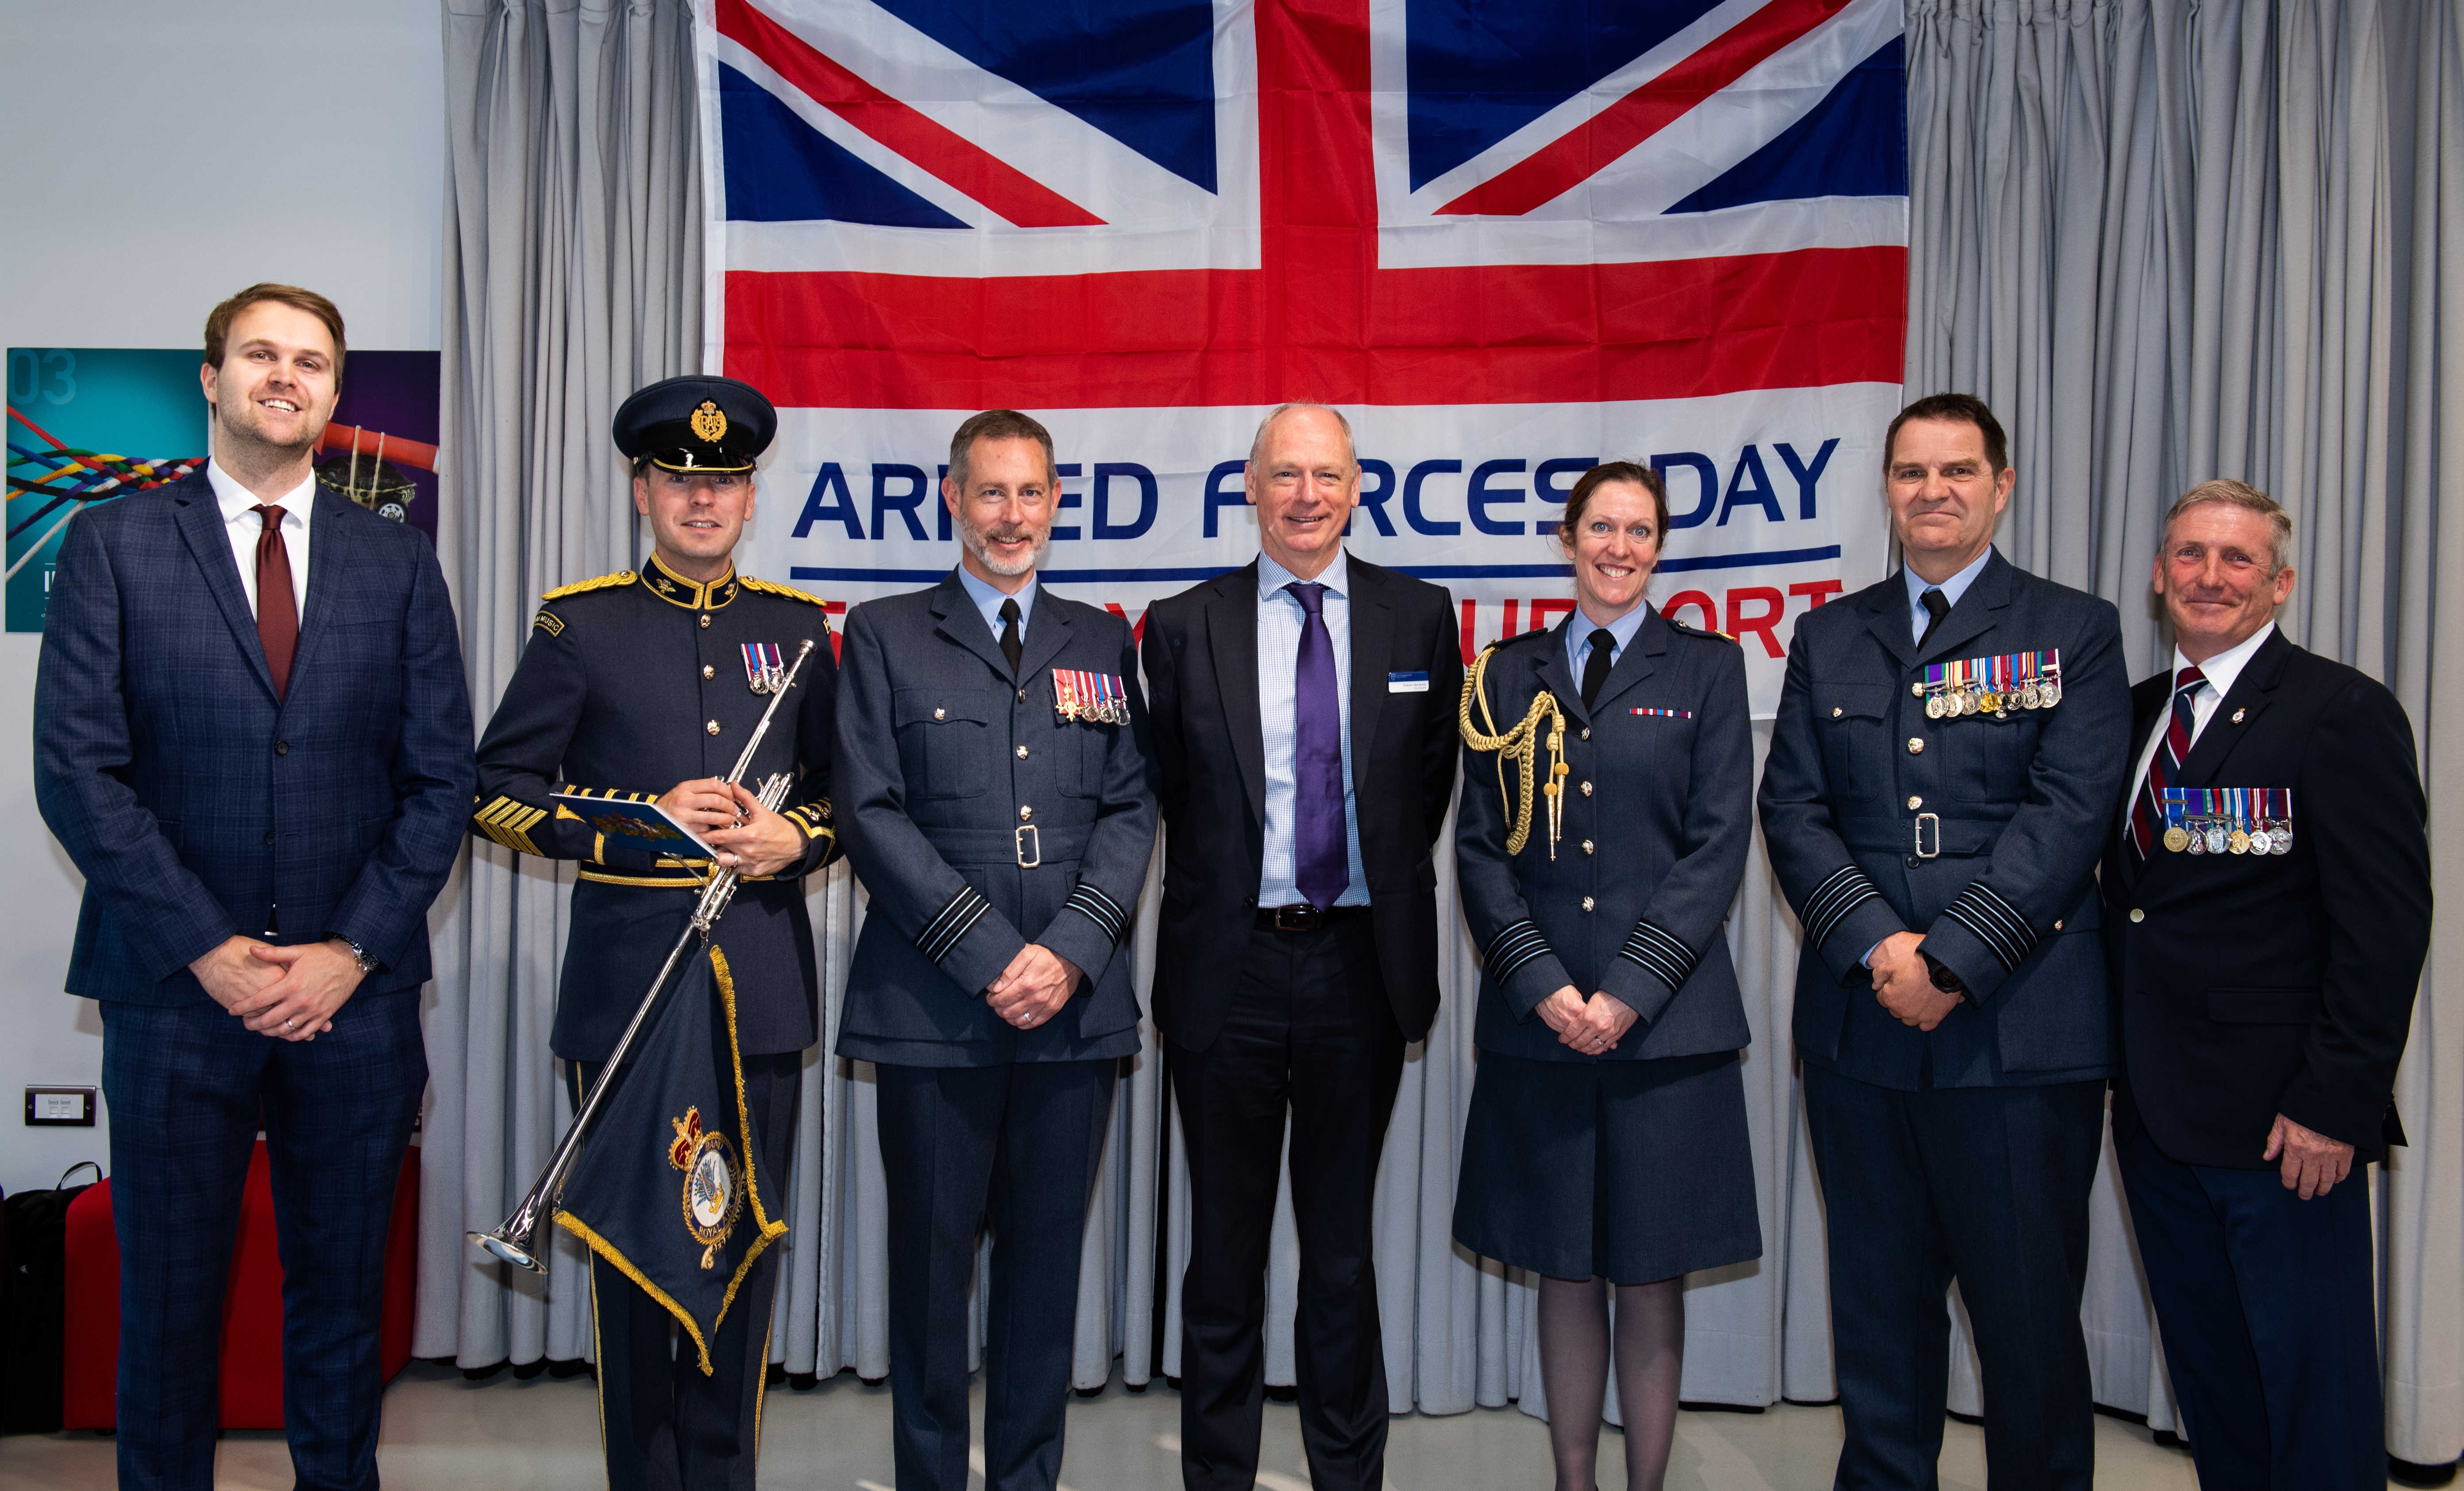 Local RAF Station Commanders, Central Band of the Royal Air Force, Piers Morrell OBE, Professor Nick Braisby, Wayne Palmer and Matthew Herring Rogers